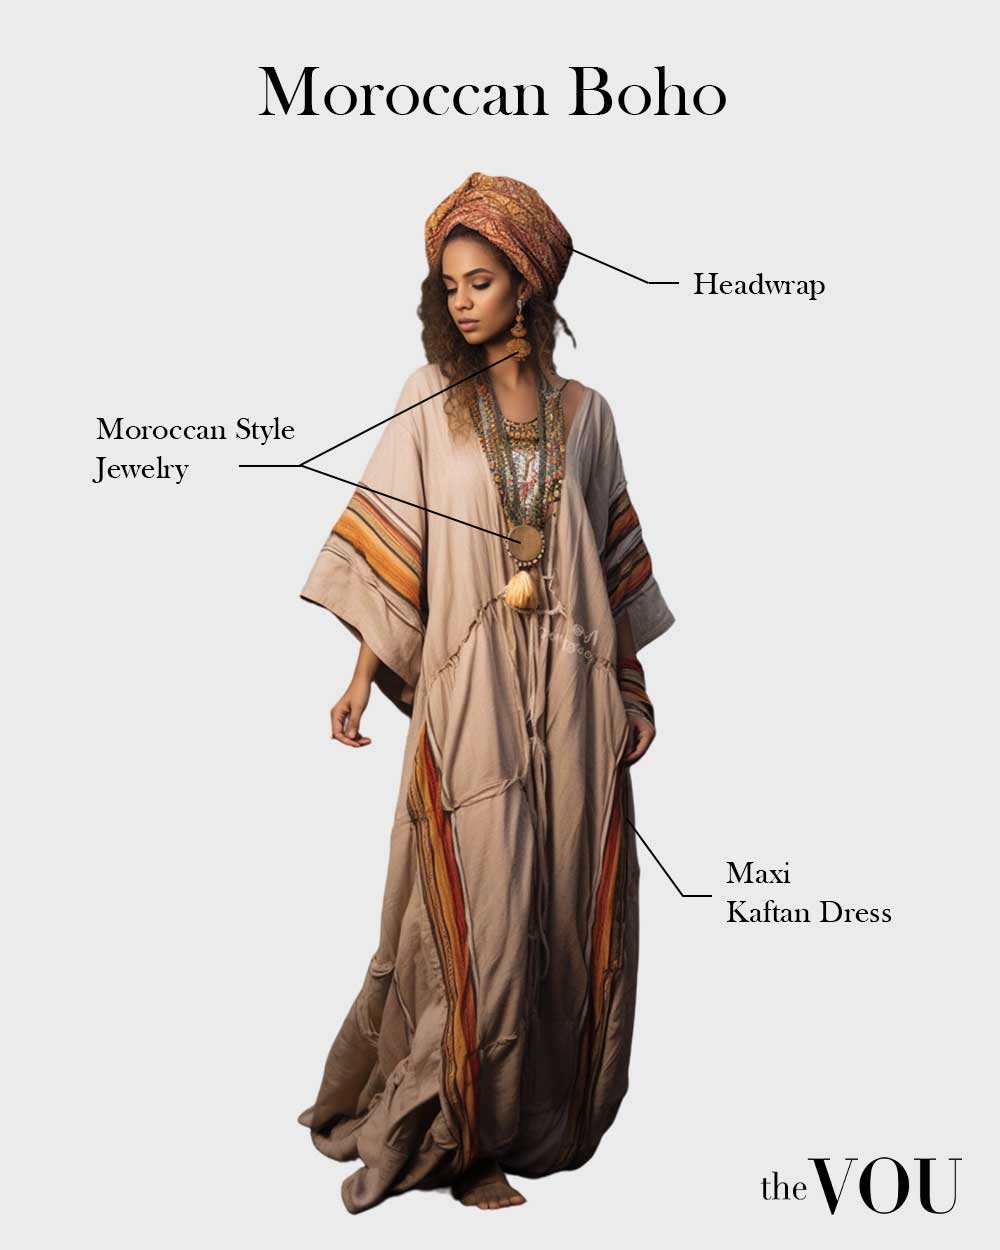 Moroccan boho outfit